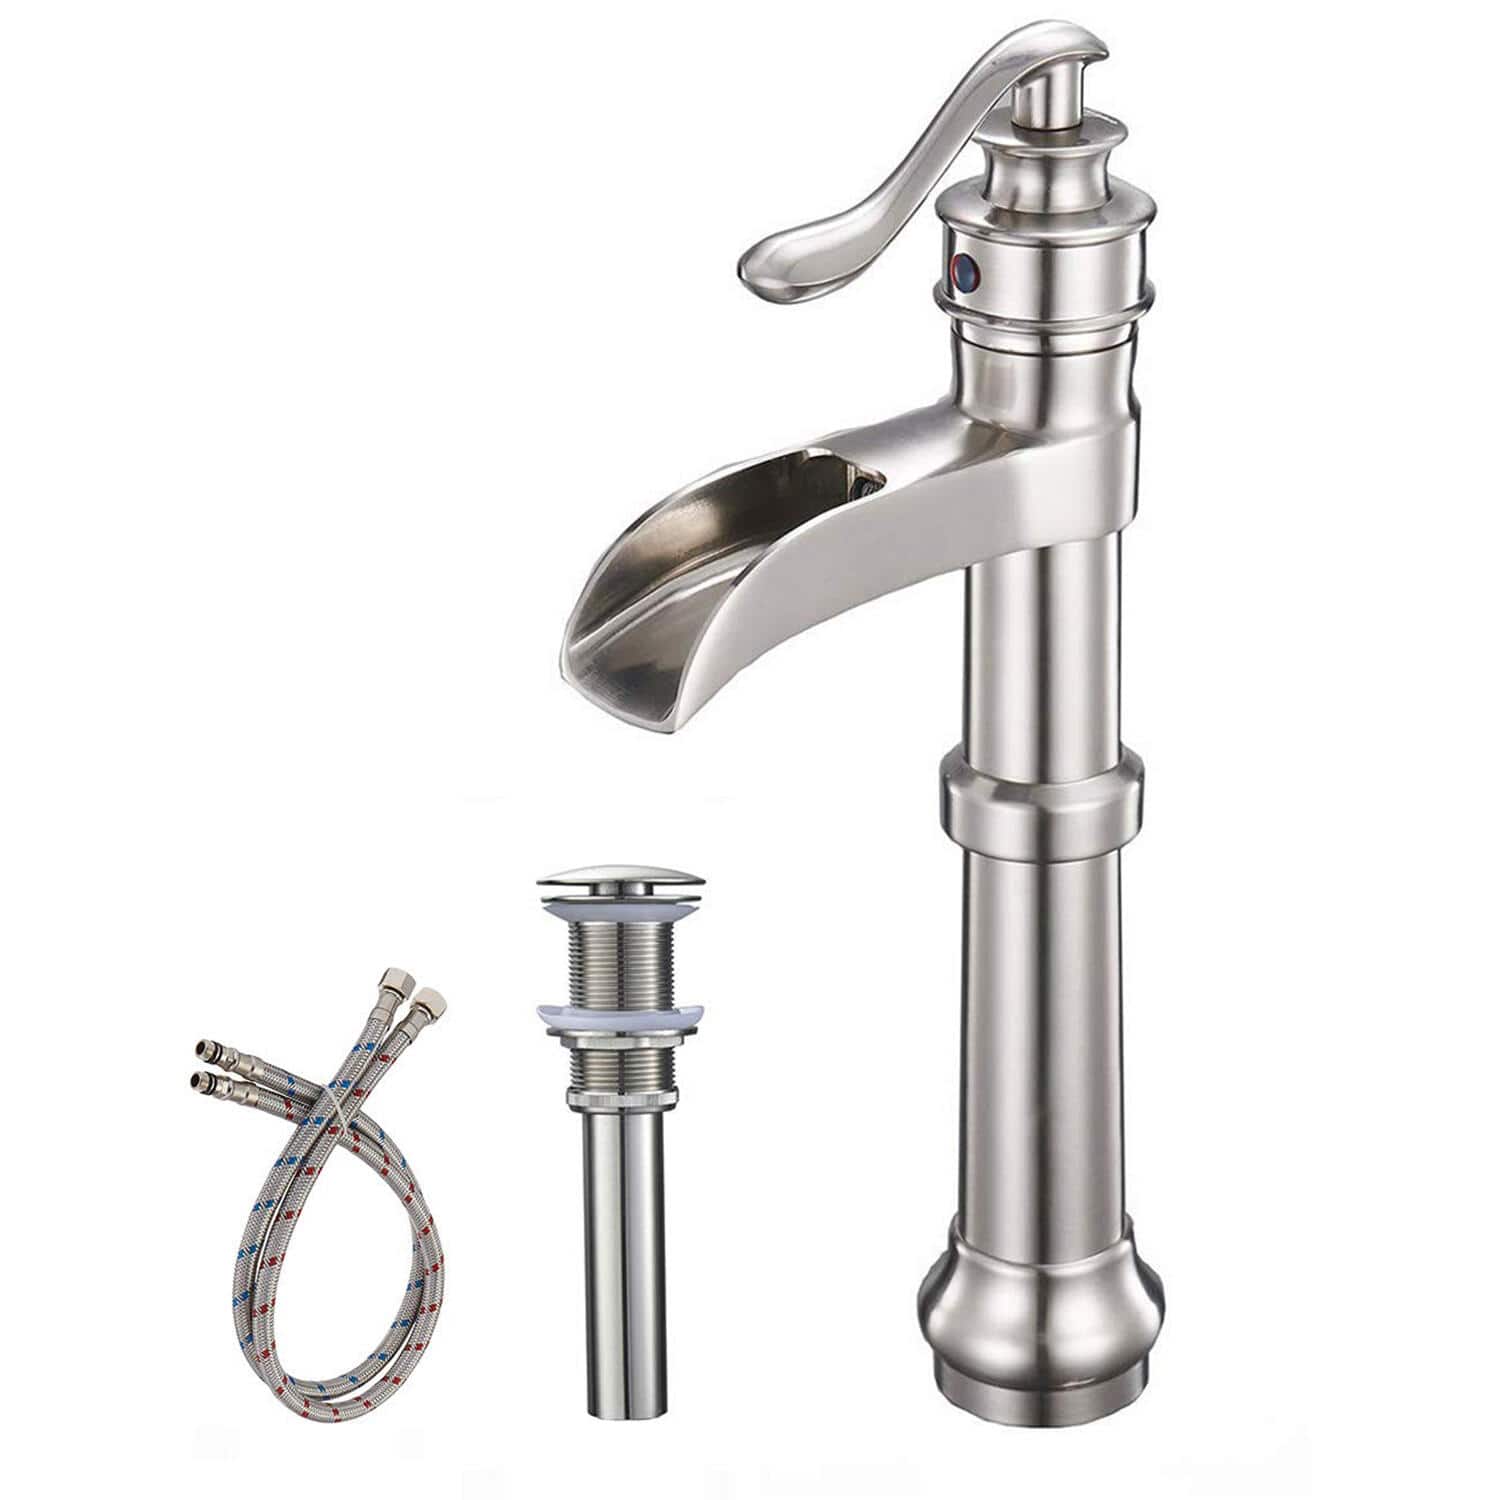 Antique Slim Single-Handle Single Hole Bathroom Faucet with Drain Kit Included